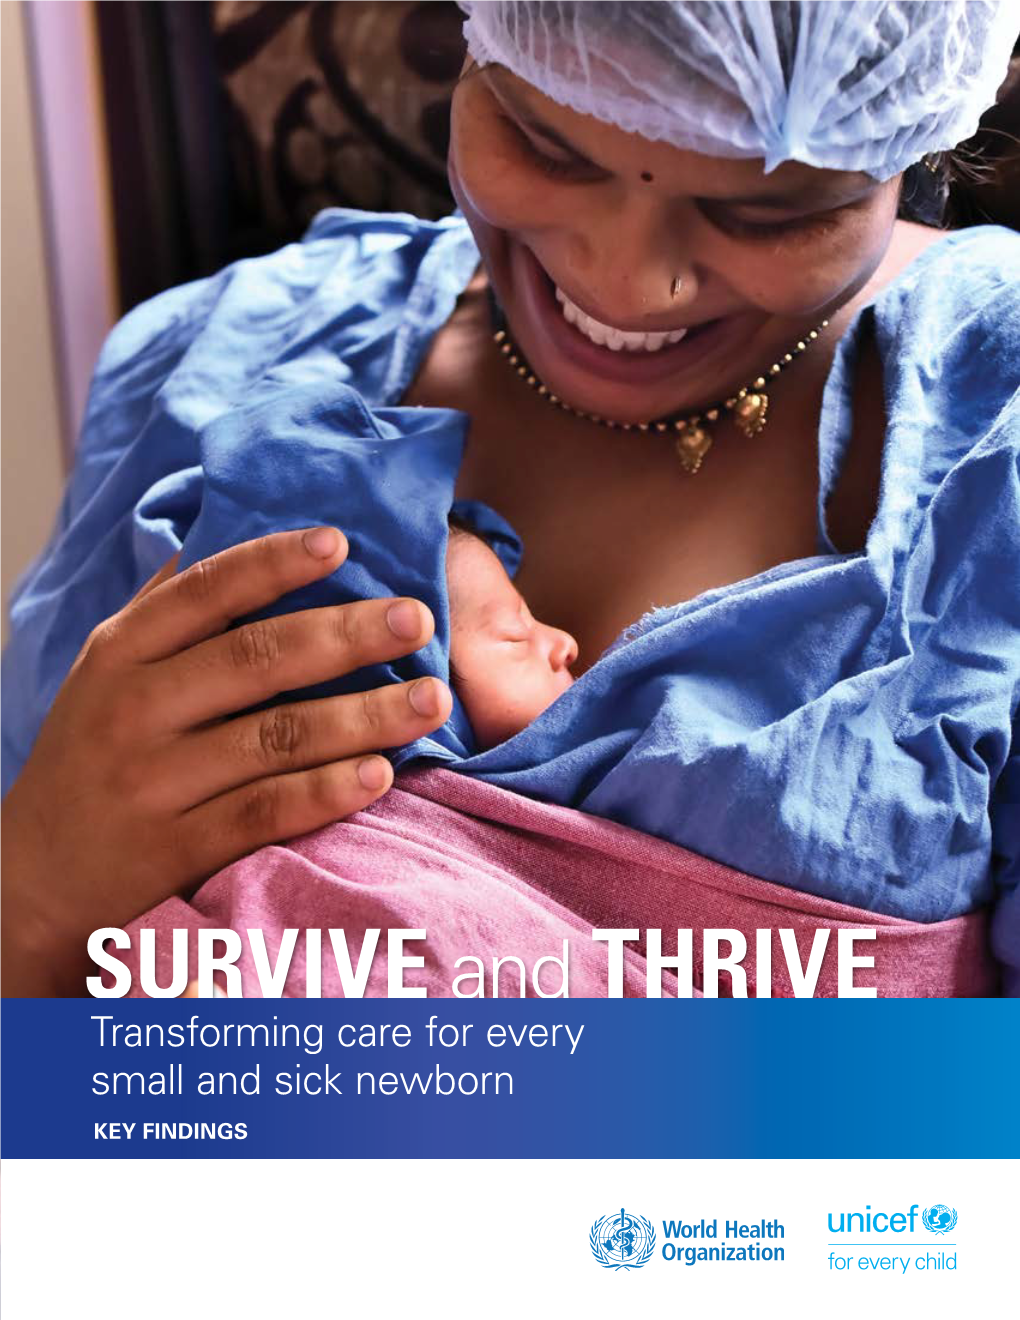 SURVIVE and THRIVE. Transforming Care for Every Small and Sick Newborn